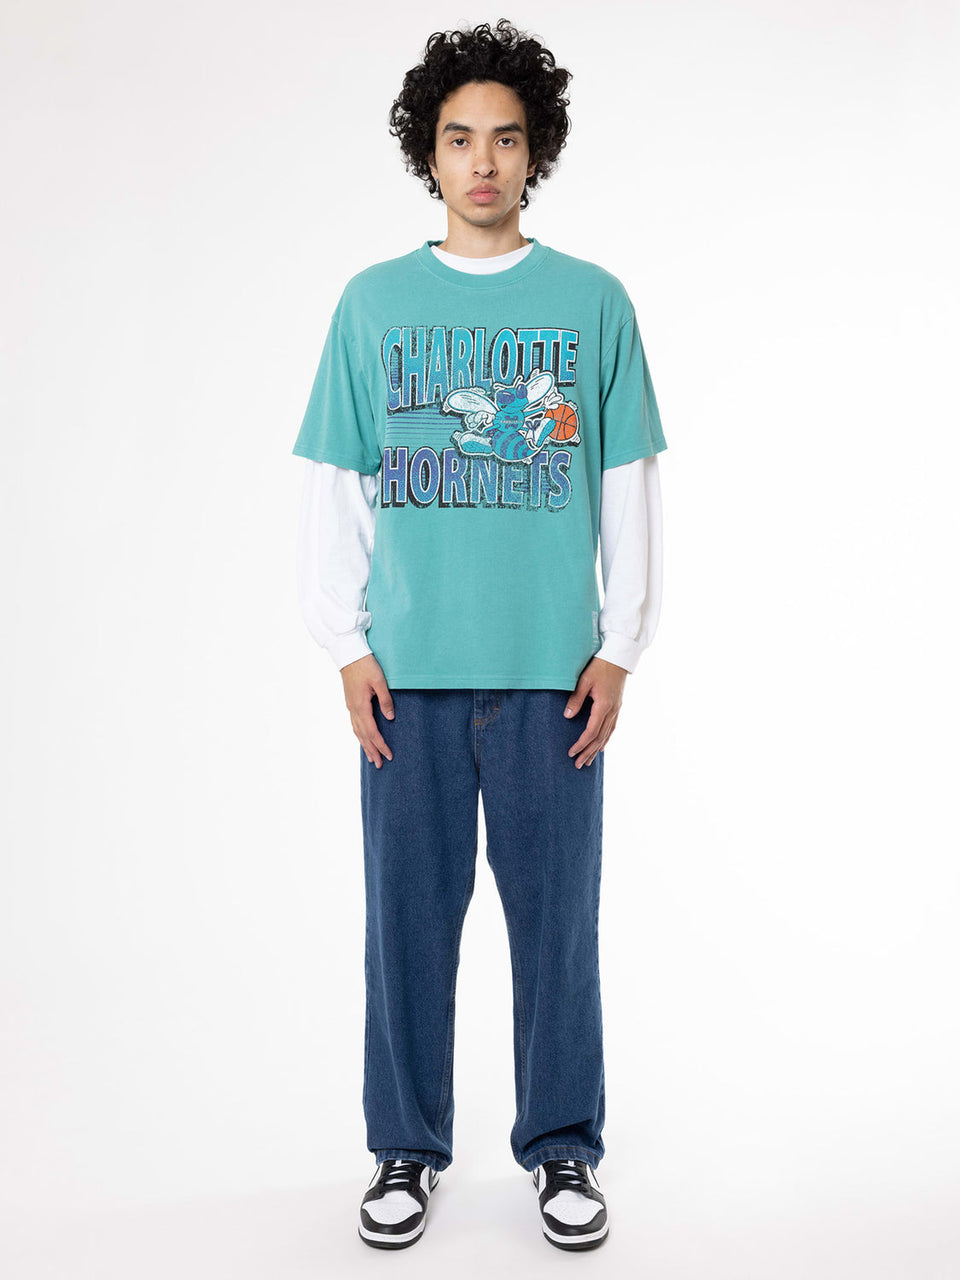 Mitchell & Ness Incline Stack Tee Hornets - Faded Aqua